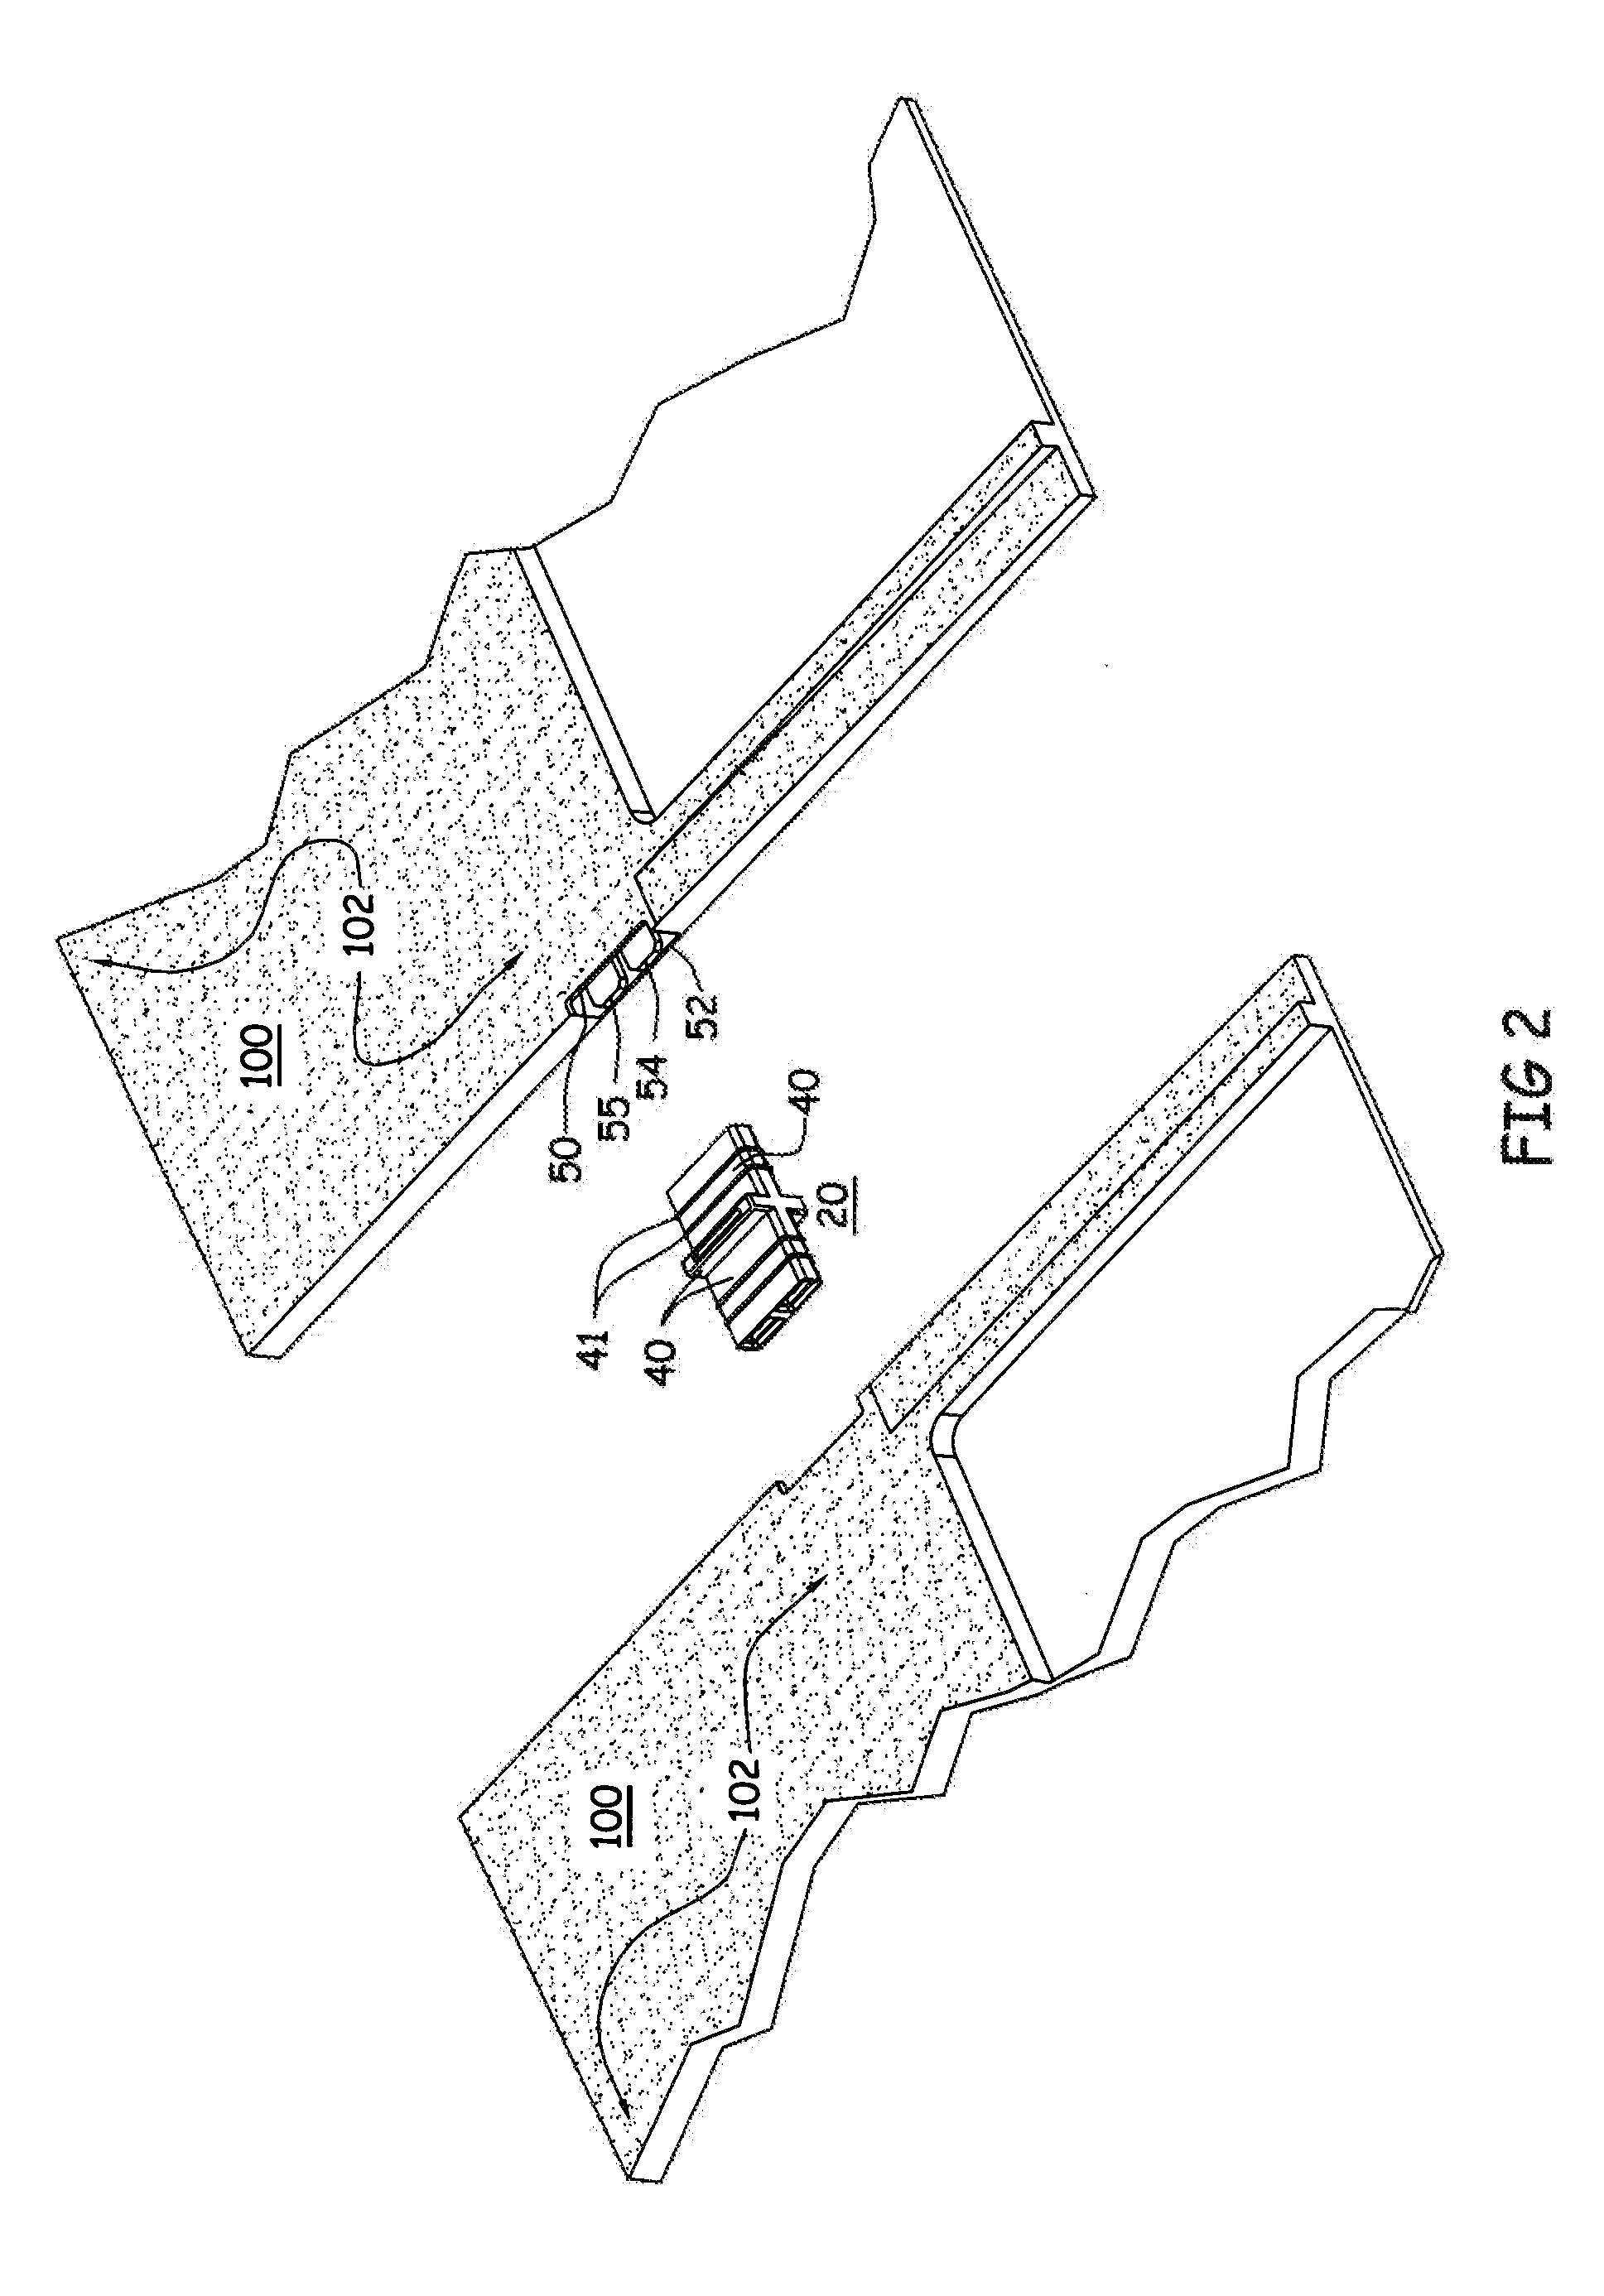 Connector device for building integrated photovoltaic device